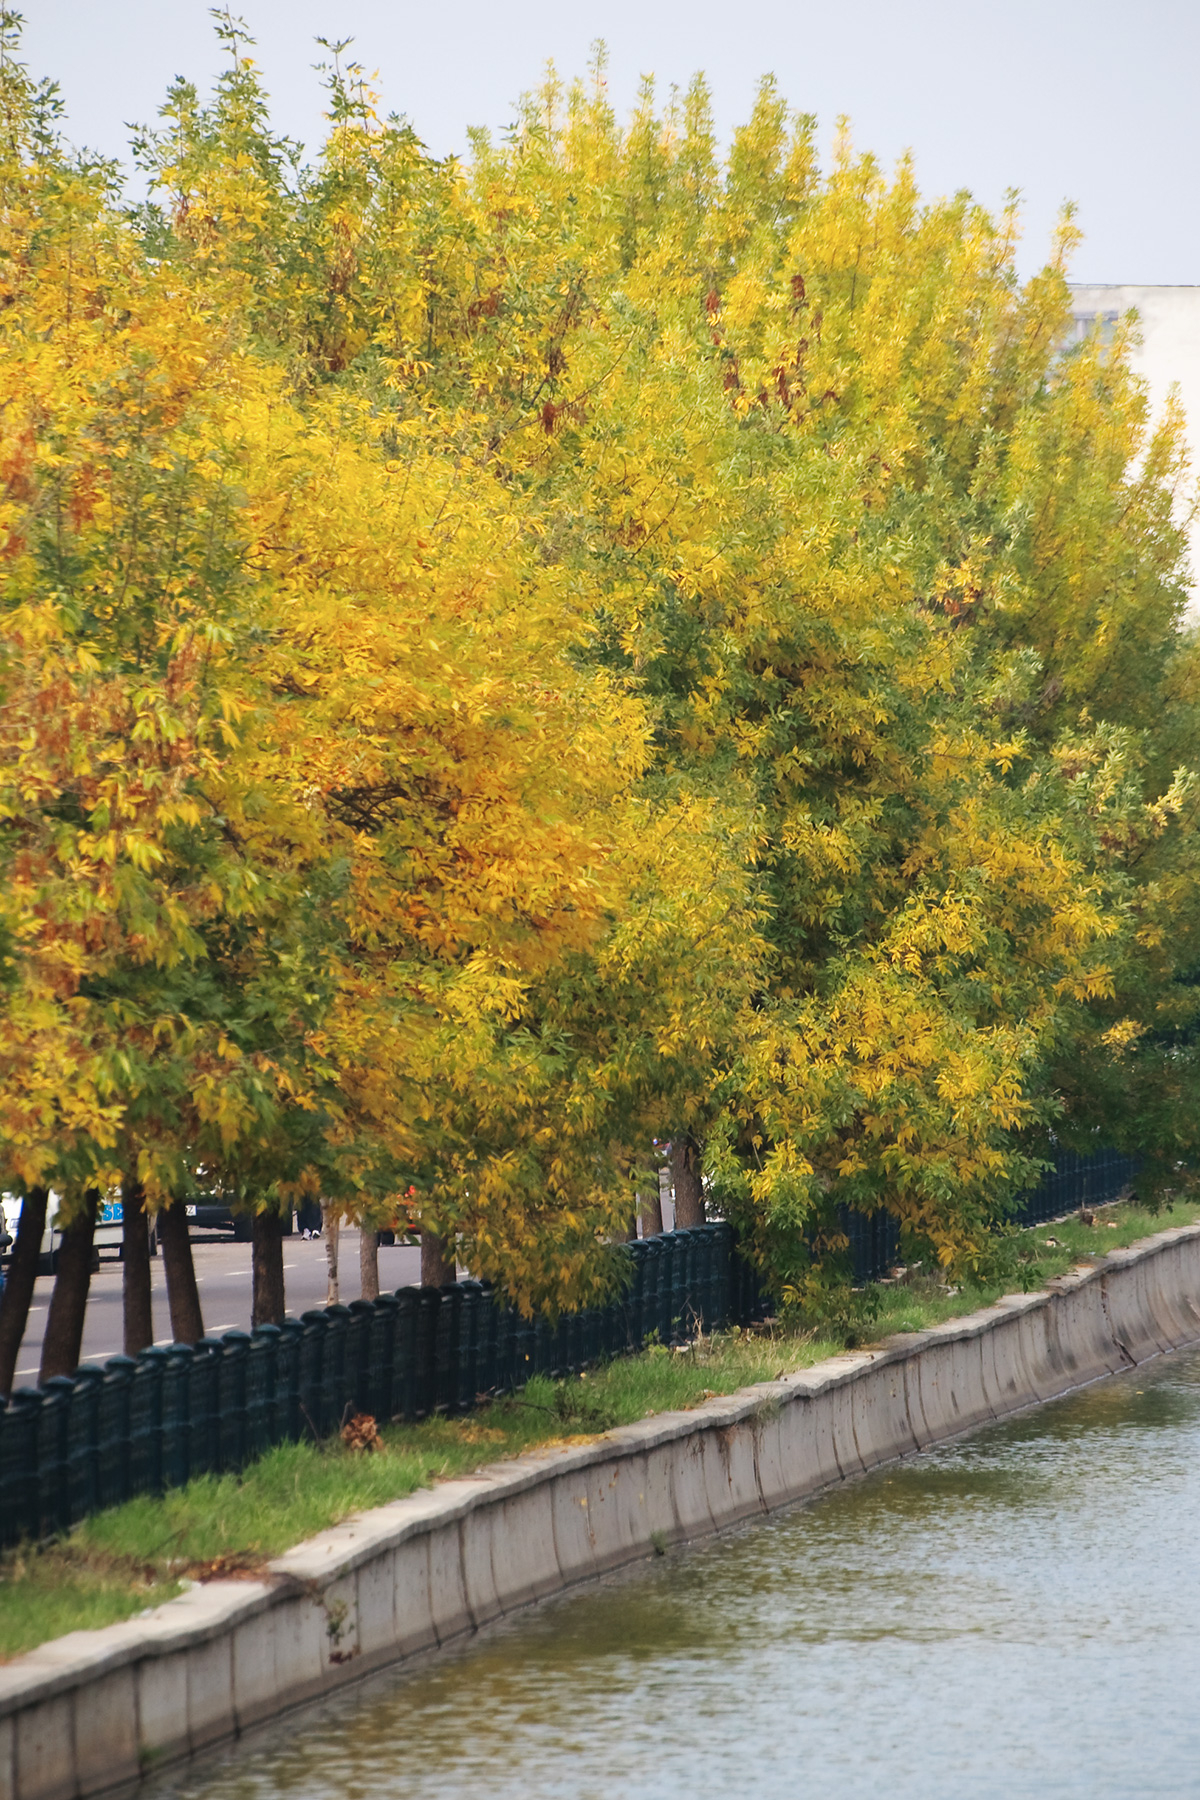 Yellow trees in the city